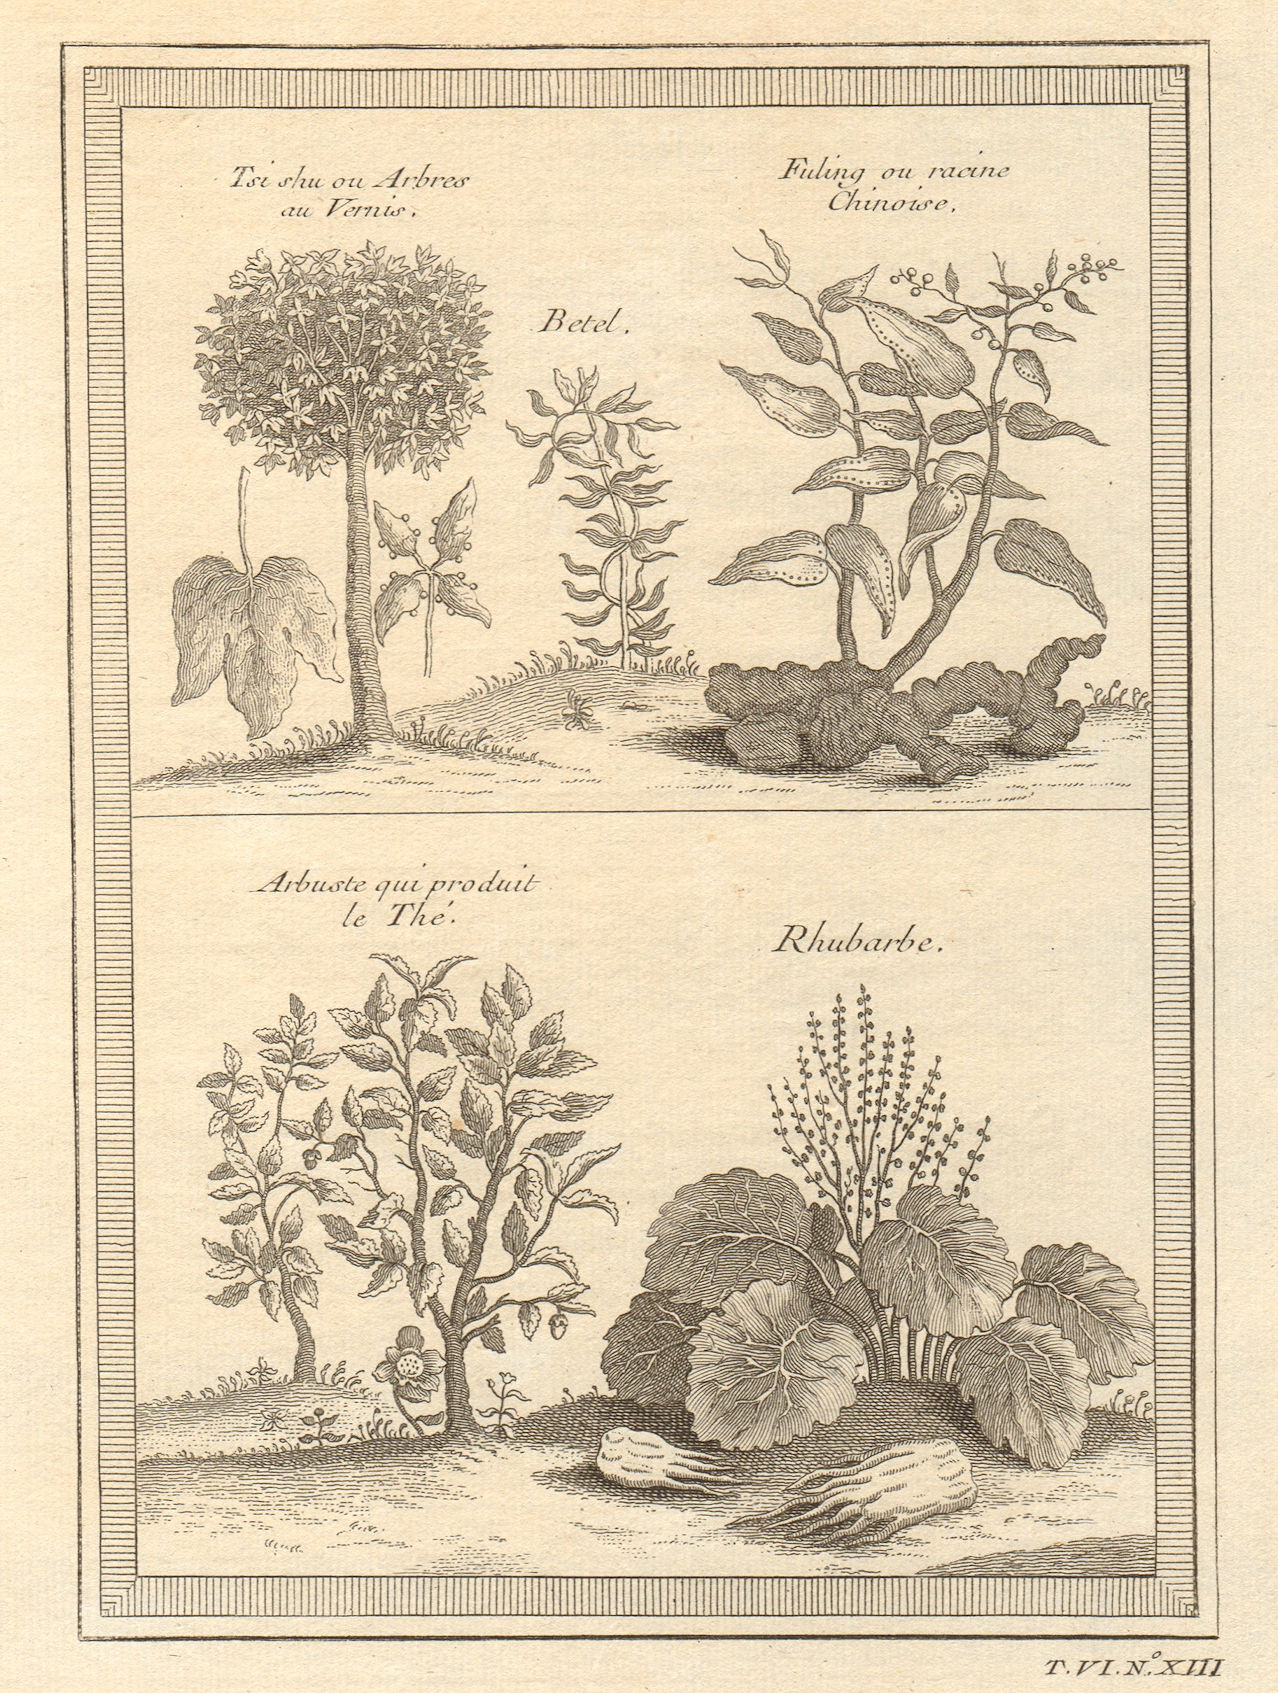 Associate Product China root. Tea plant. Rhubarb. Goldenrain Varnish or Chinese lacquer tree 1748